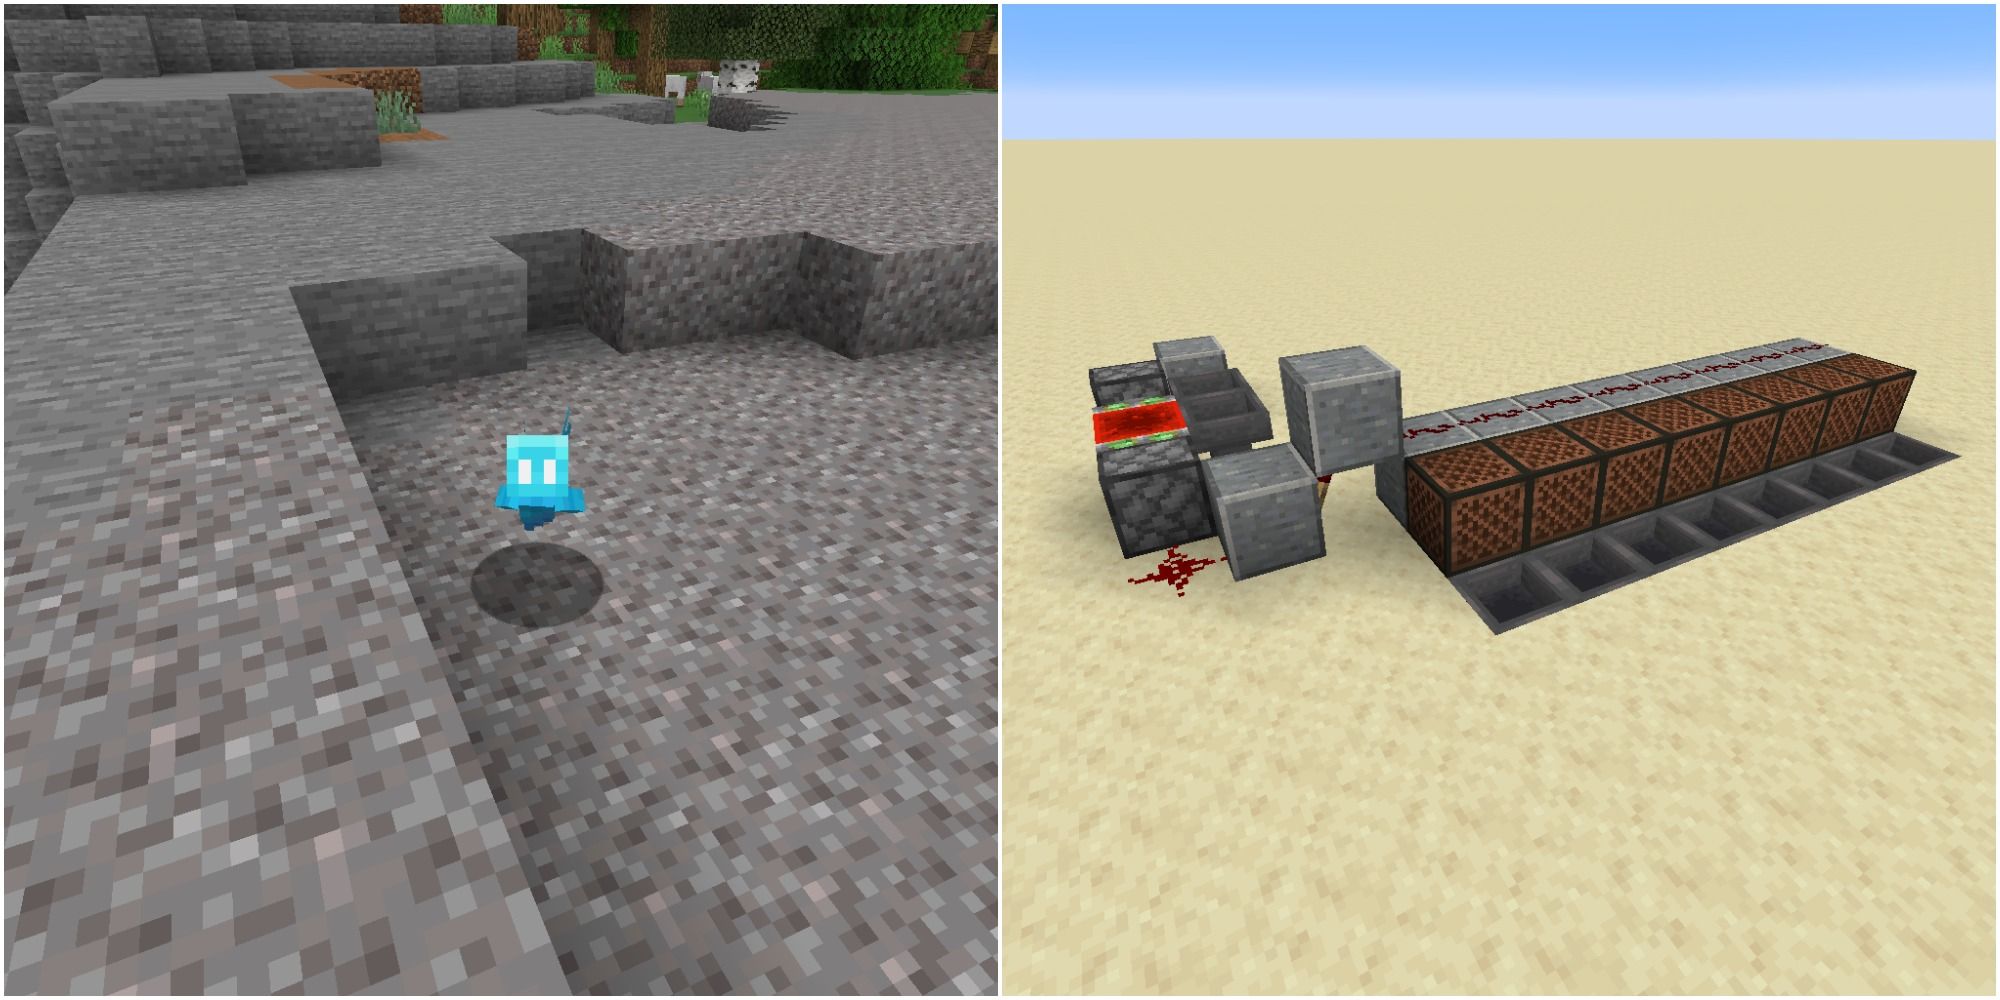 How to Place an Item in Minecraft